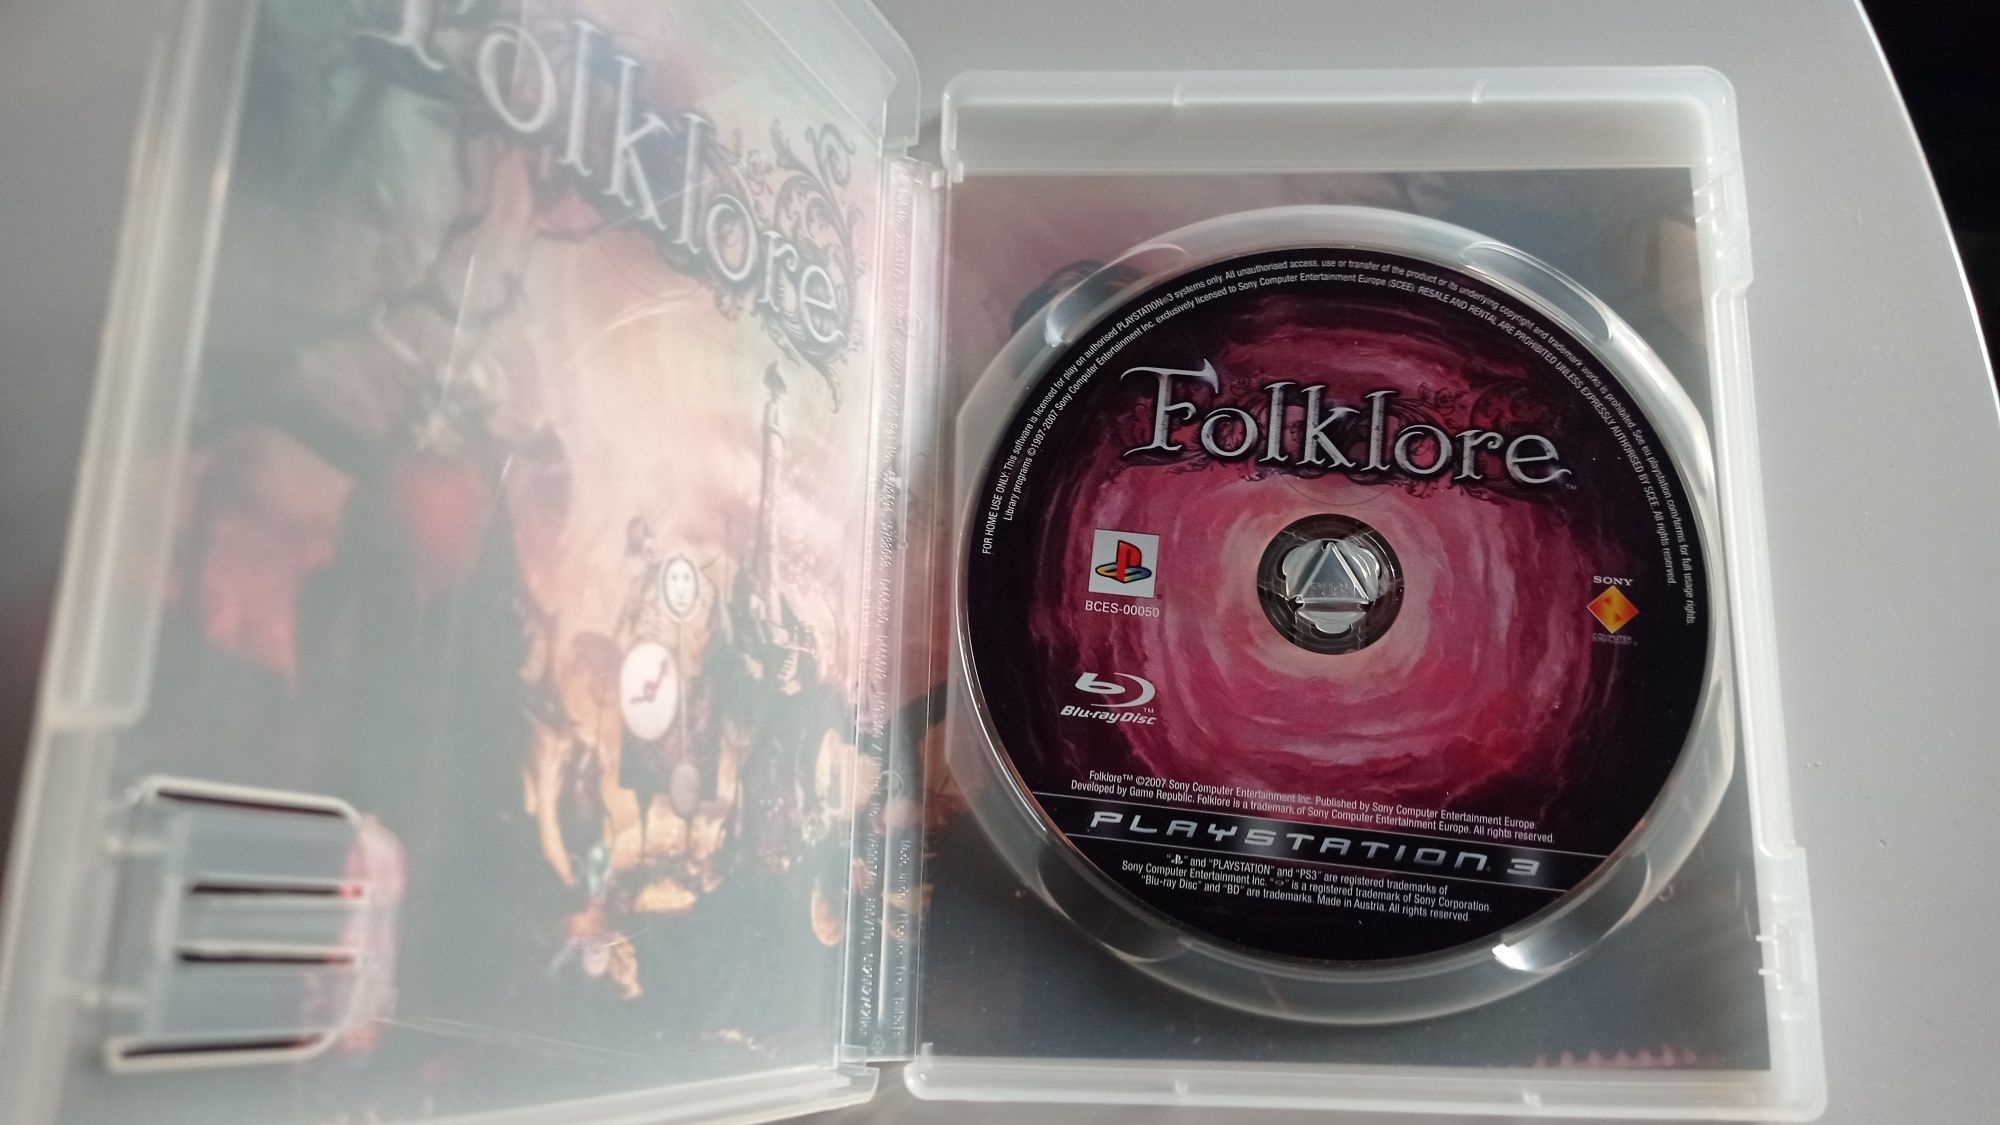 Folklore gra PlayStation 3 PS3